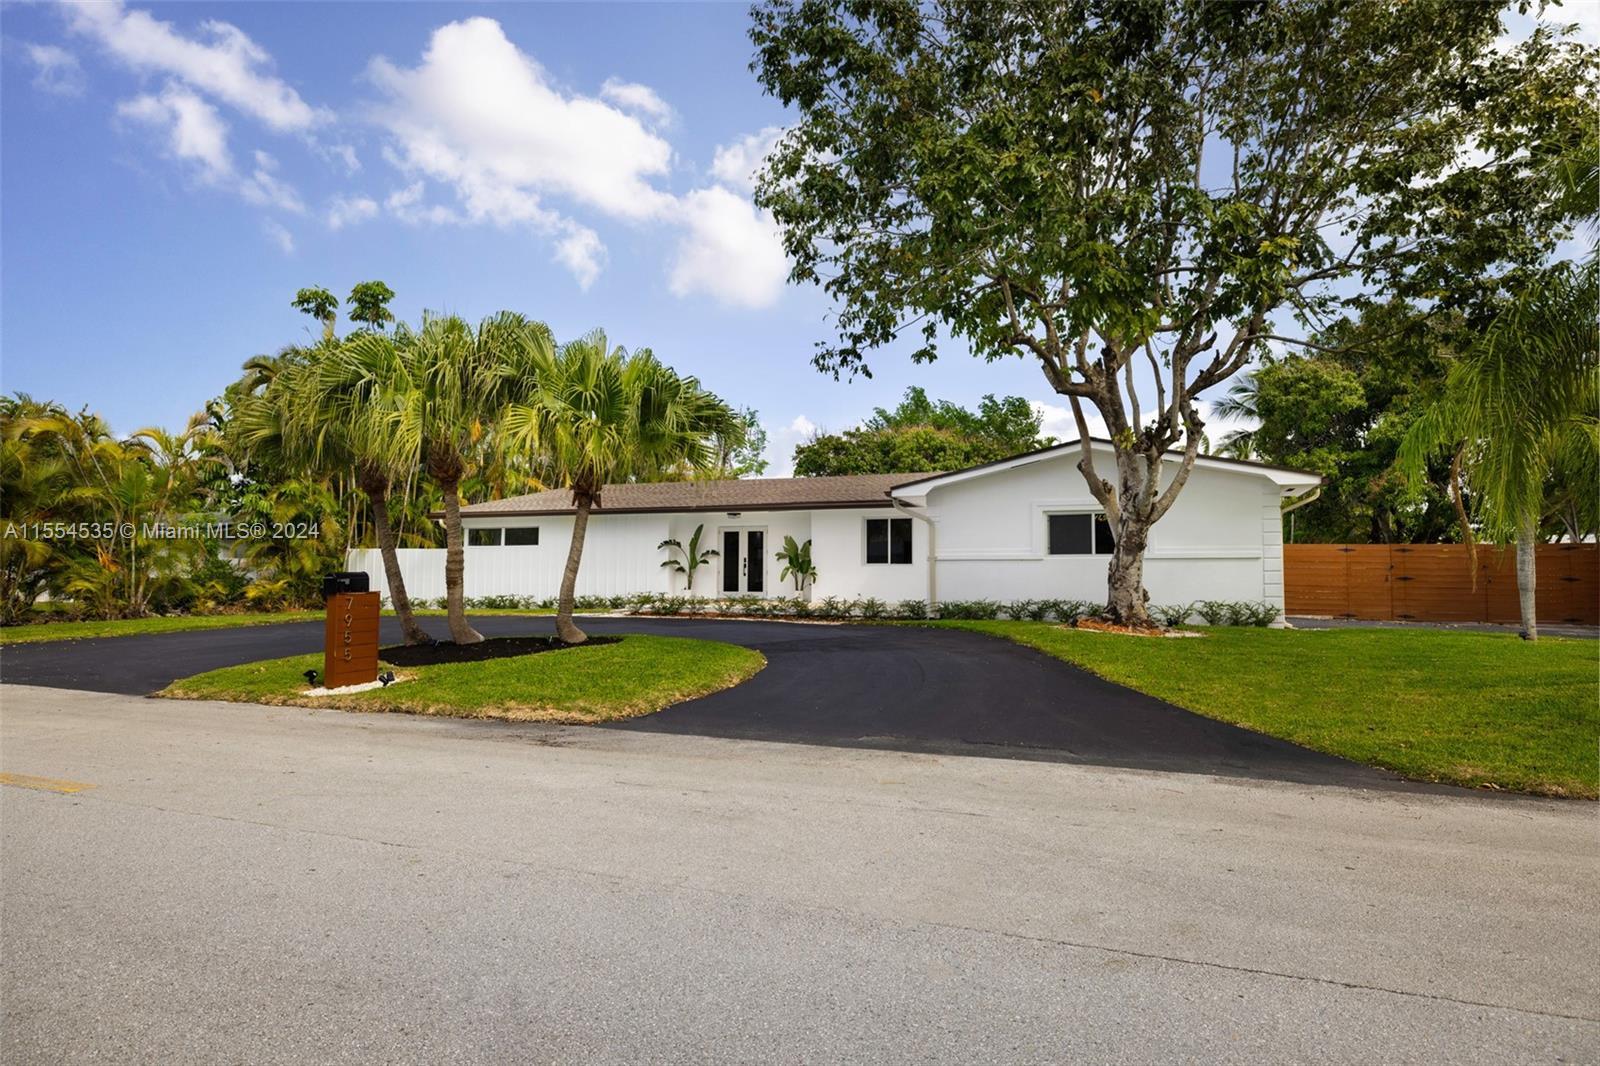 Welcome to luxury living in Palmetto Bay! This fully renovated home boasts oversized living spaces a